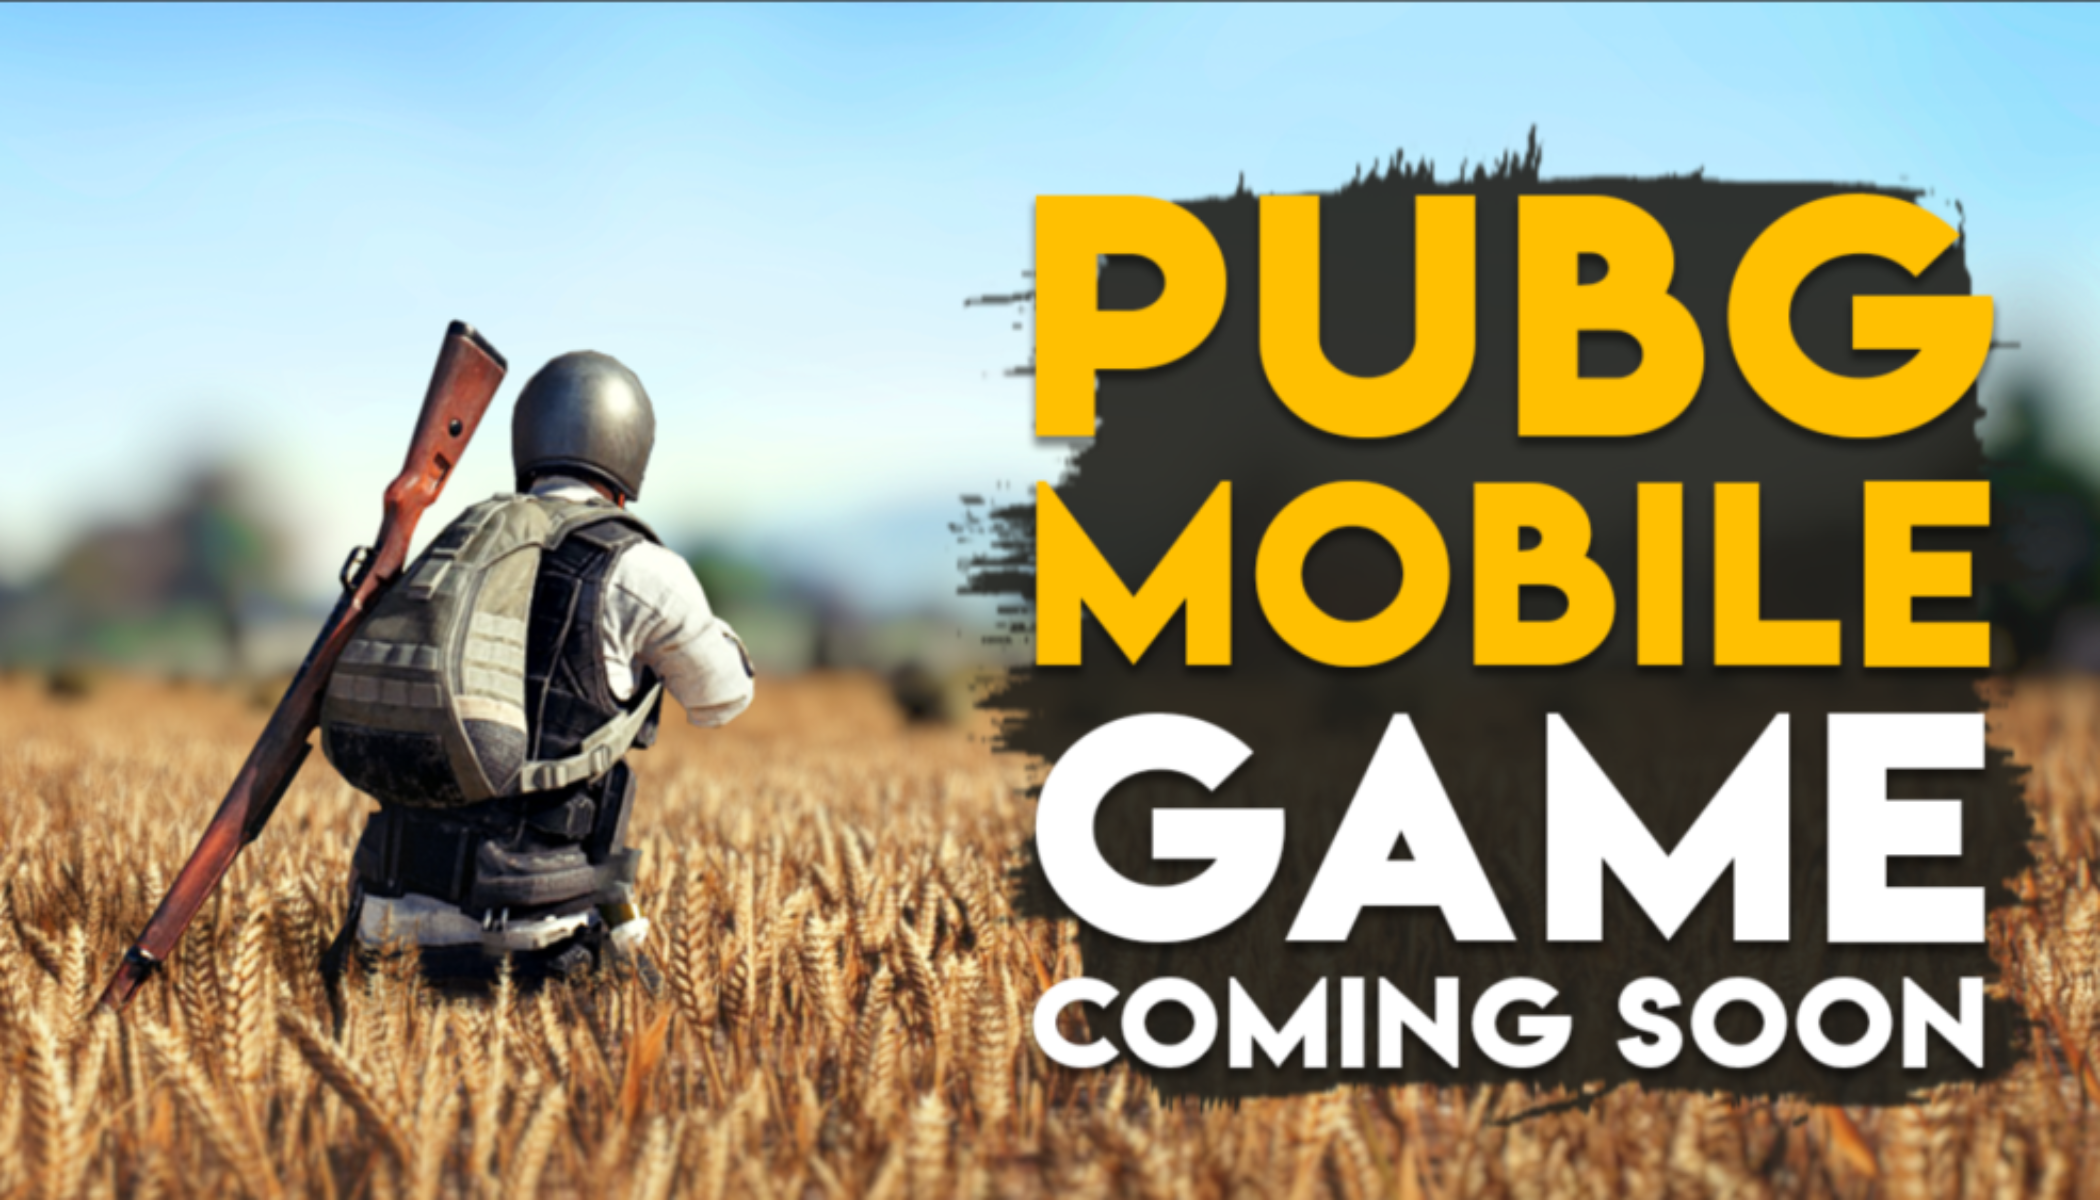 PUBG Mobile Game Coming Soon